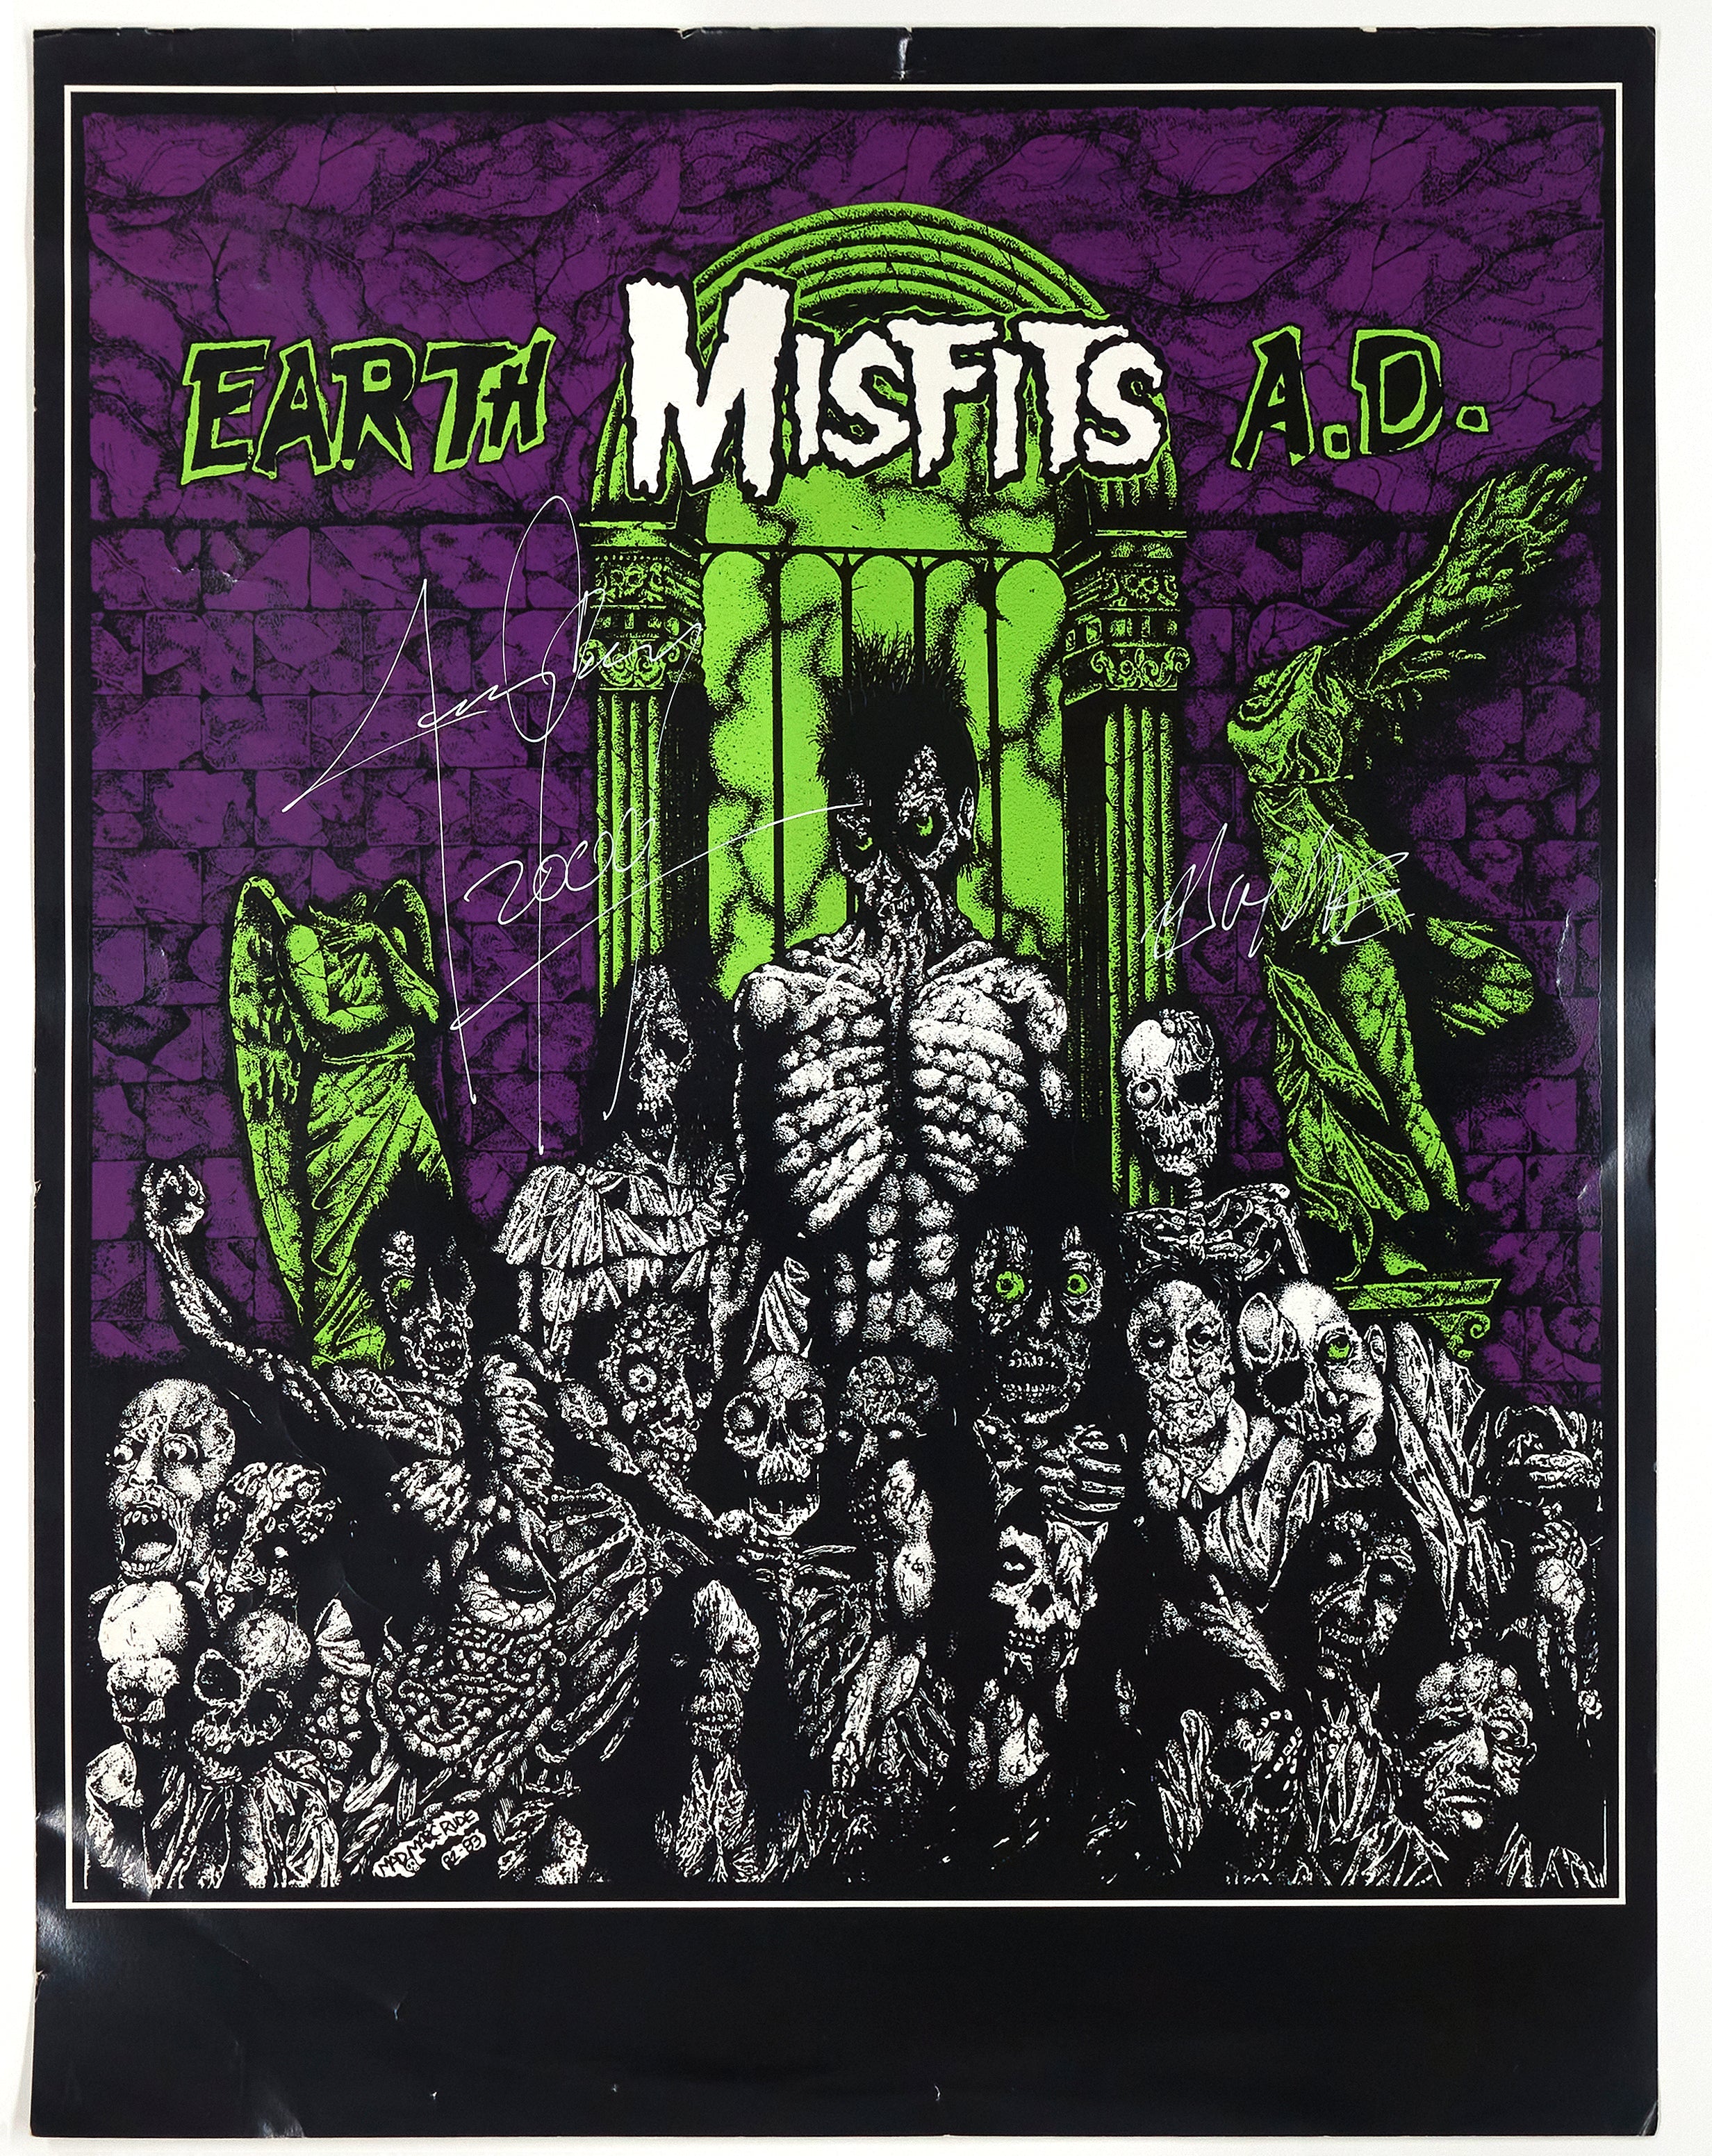 Misfits - Earth A.D. Autographed by Doyle / Jerry Glossy Screen Printed Poster